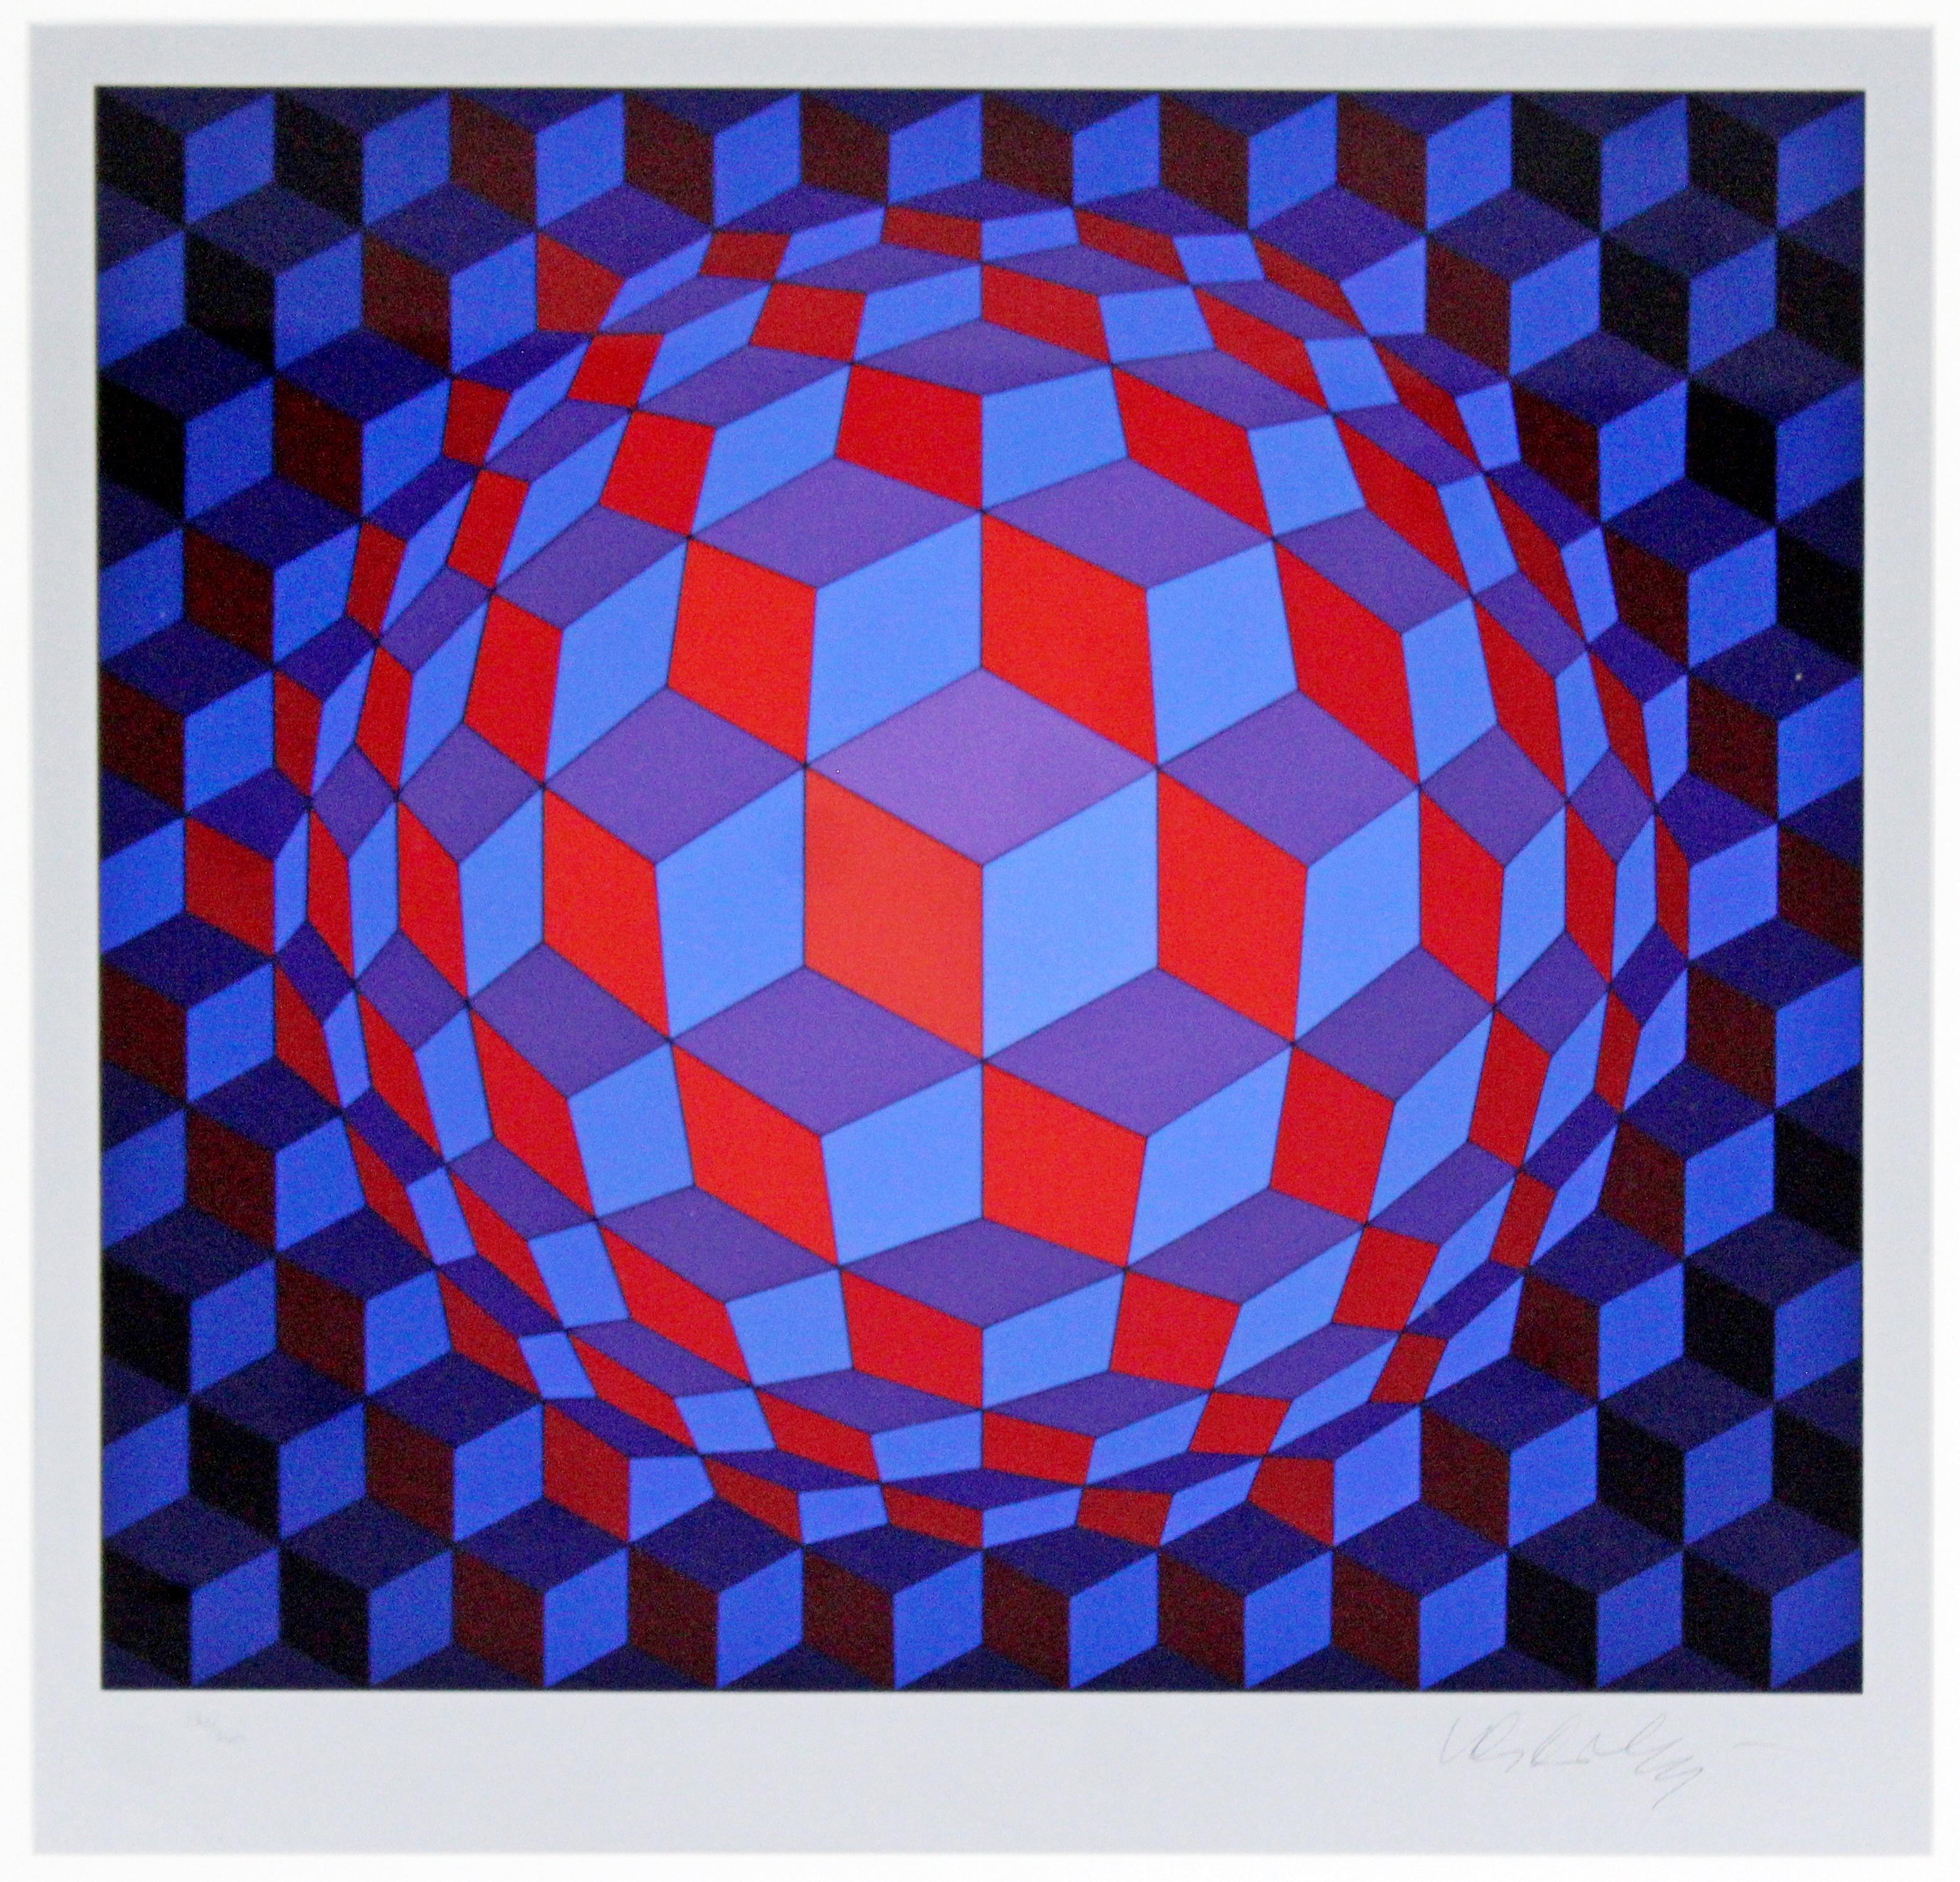 For your consideration is an eye-catching, framed Optical Art limited edition, signed and numbered by Victor Vasarely, entitled 